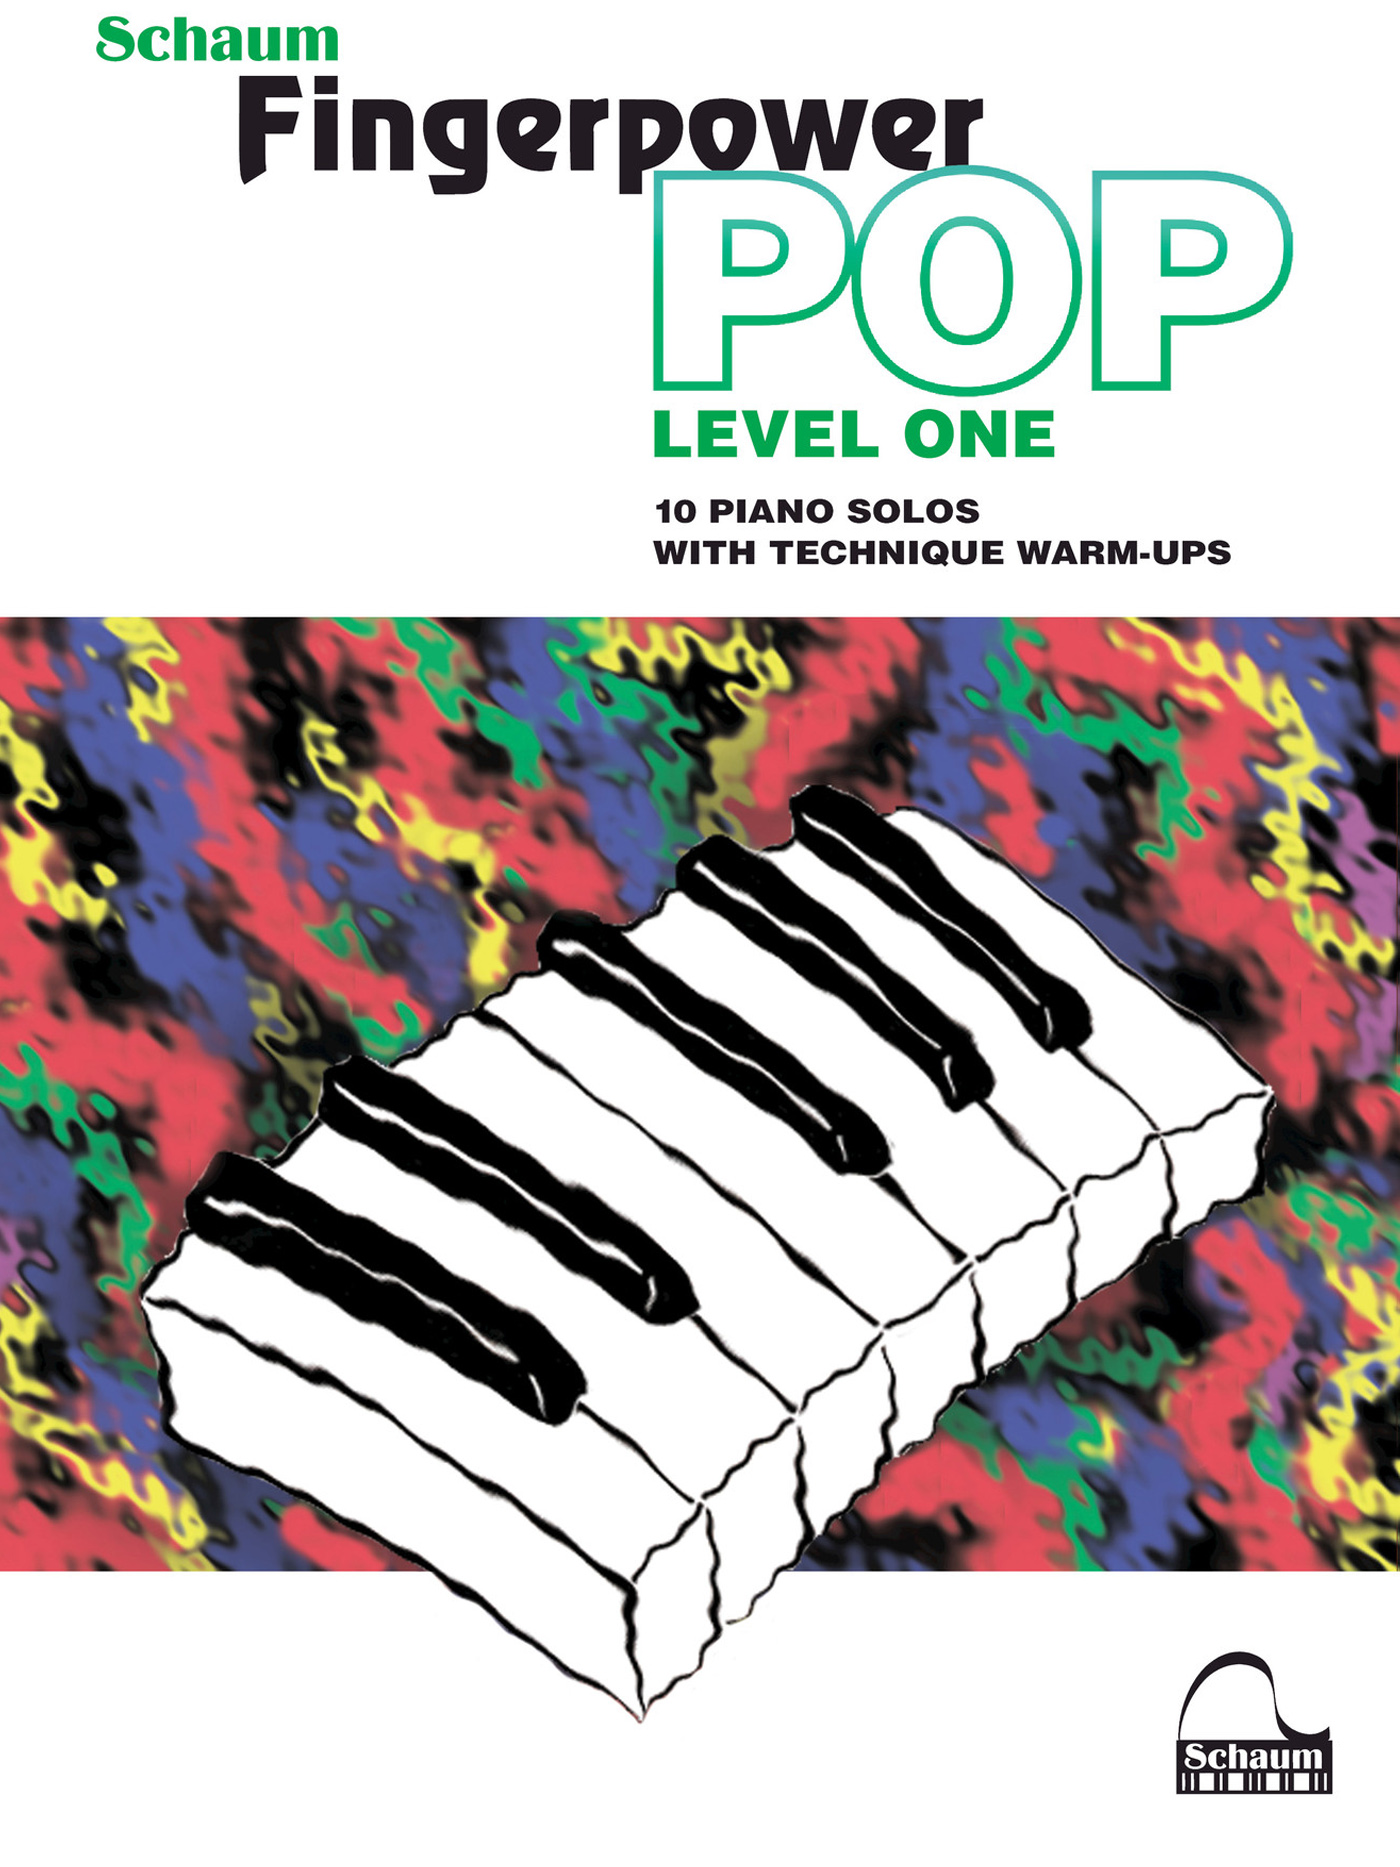 The purpose of the Fingerpower Pop series is to provide musical experiences - photo 1